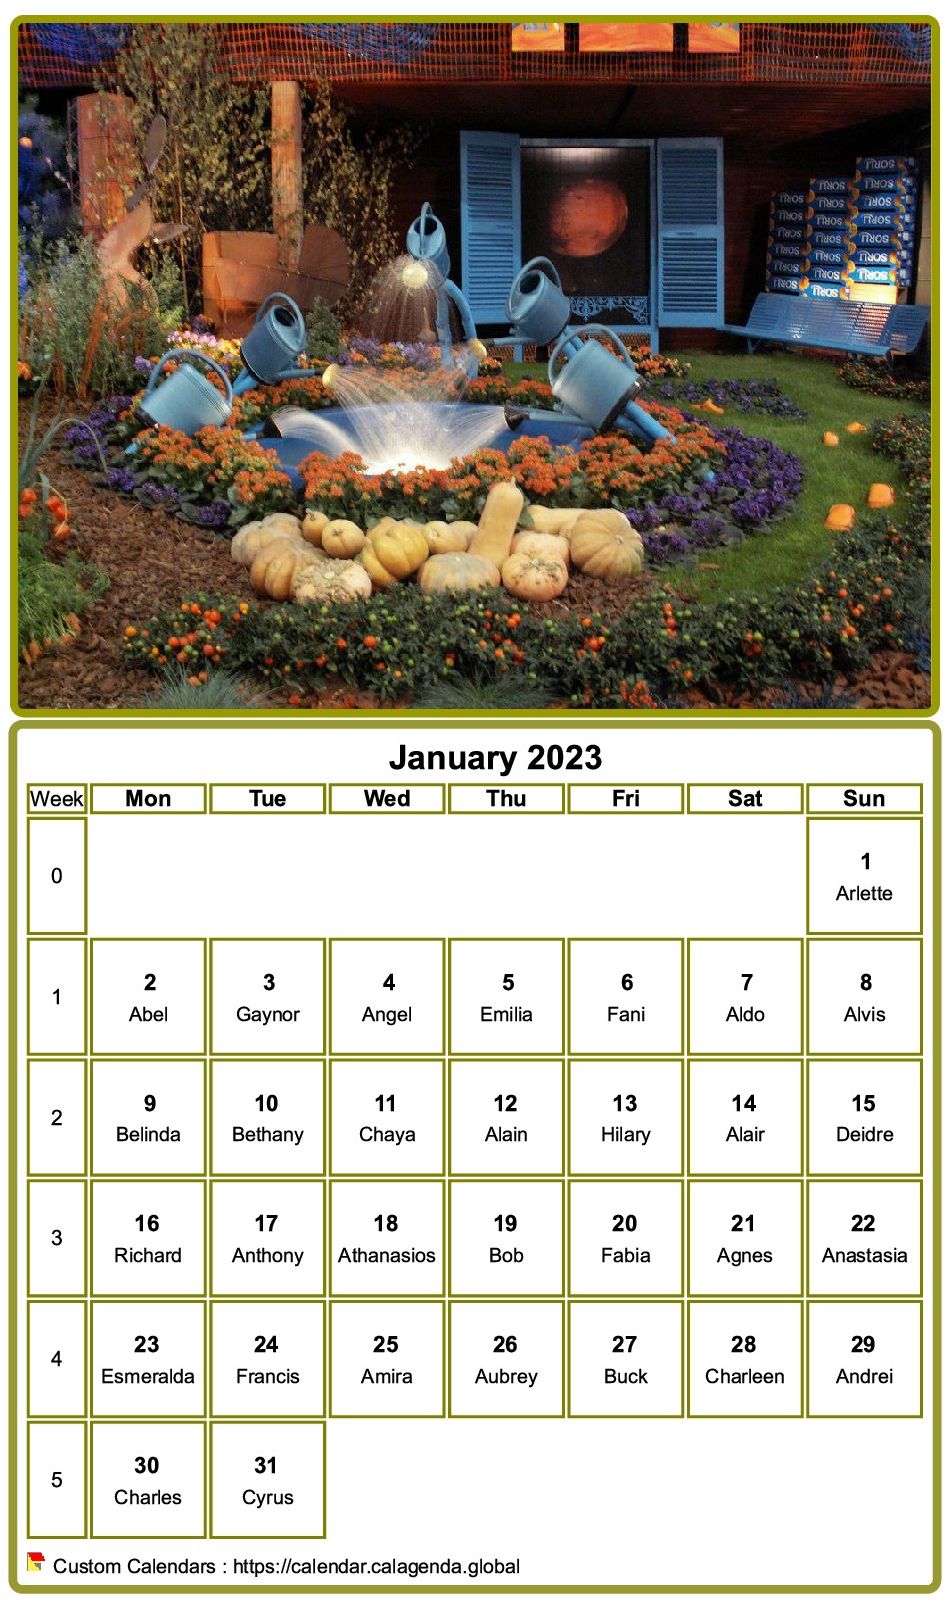 Calendar 2023 to print, monthly, with photo at the top